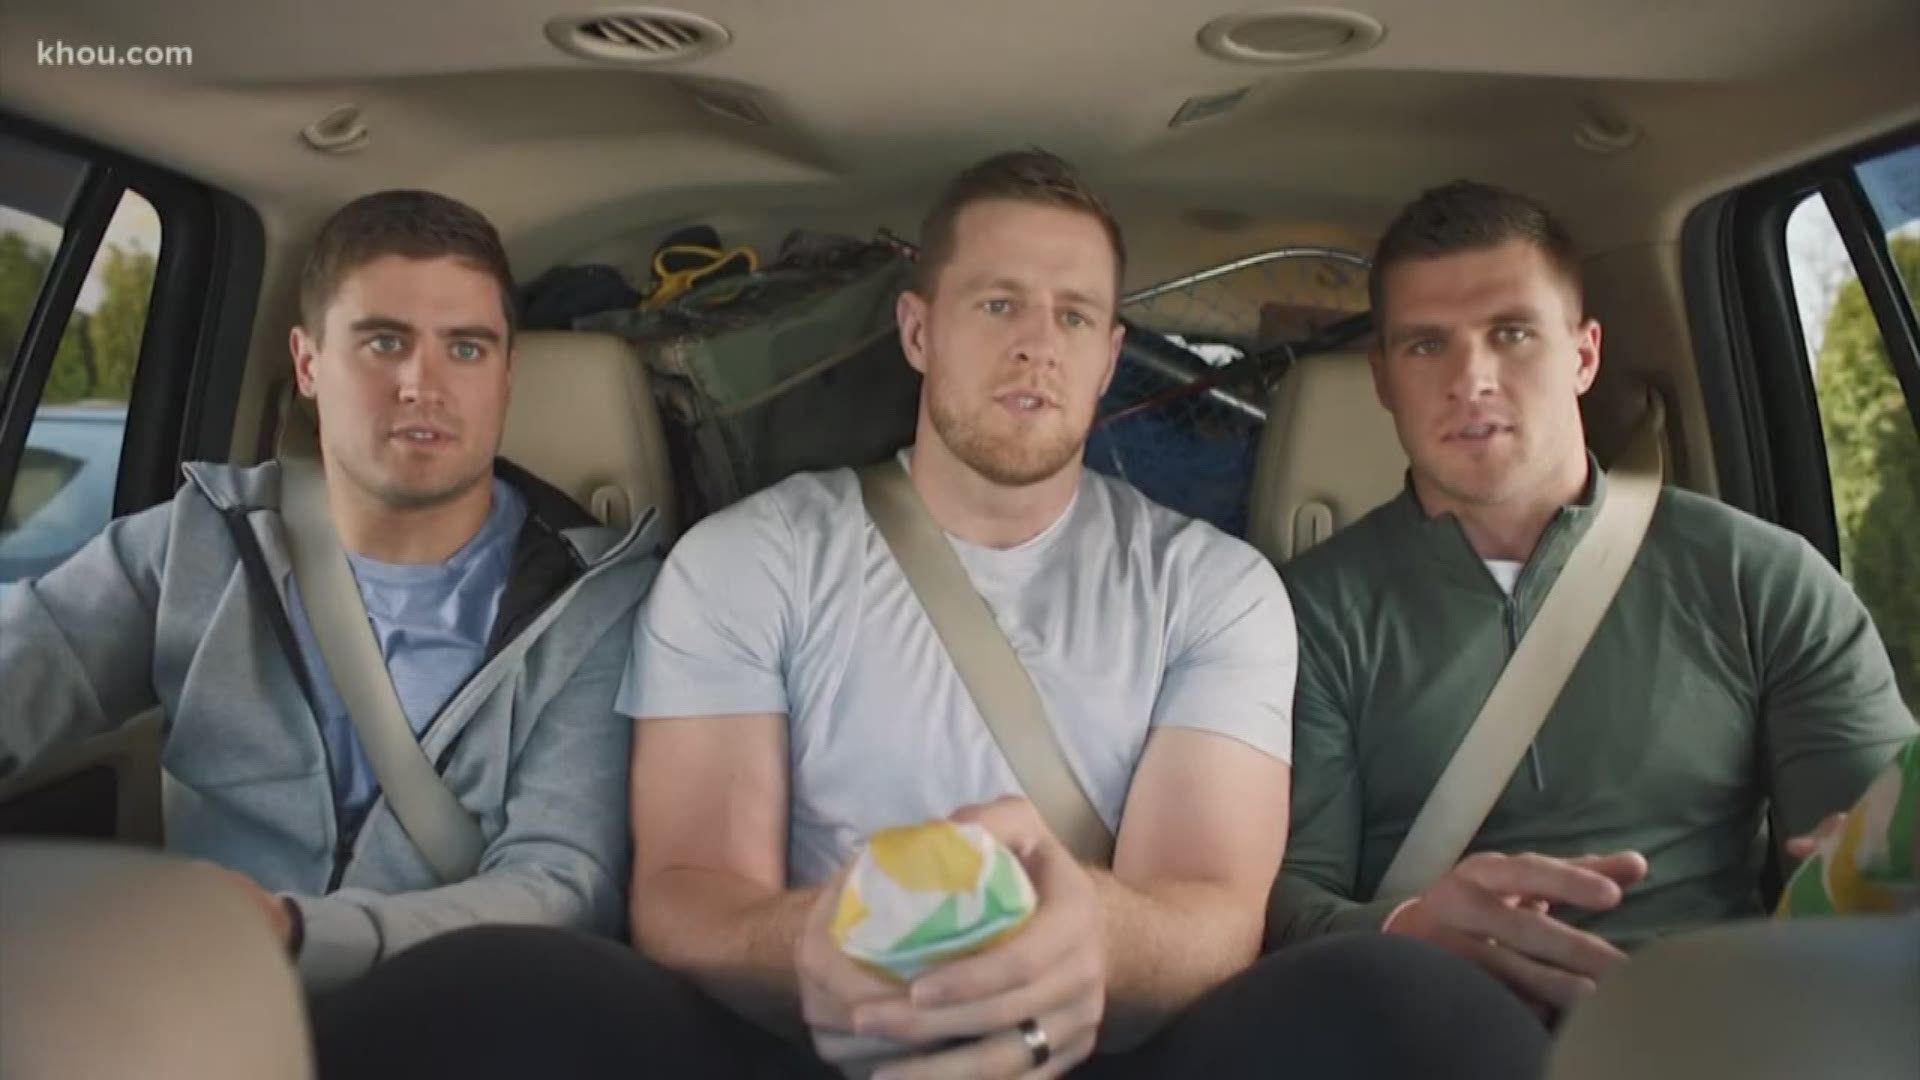 J.J. Watt and his family put their acting skills to the test in the newest Subway commercial. Check it out.